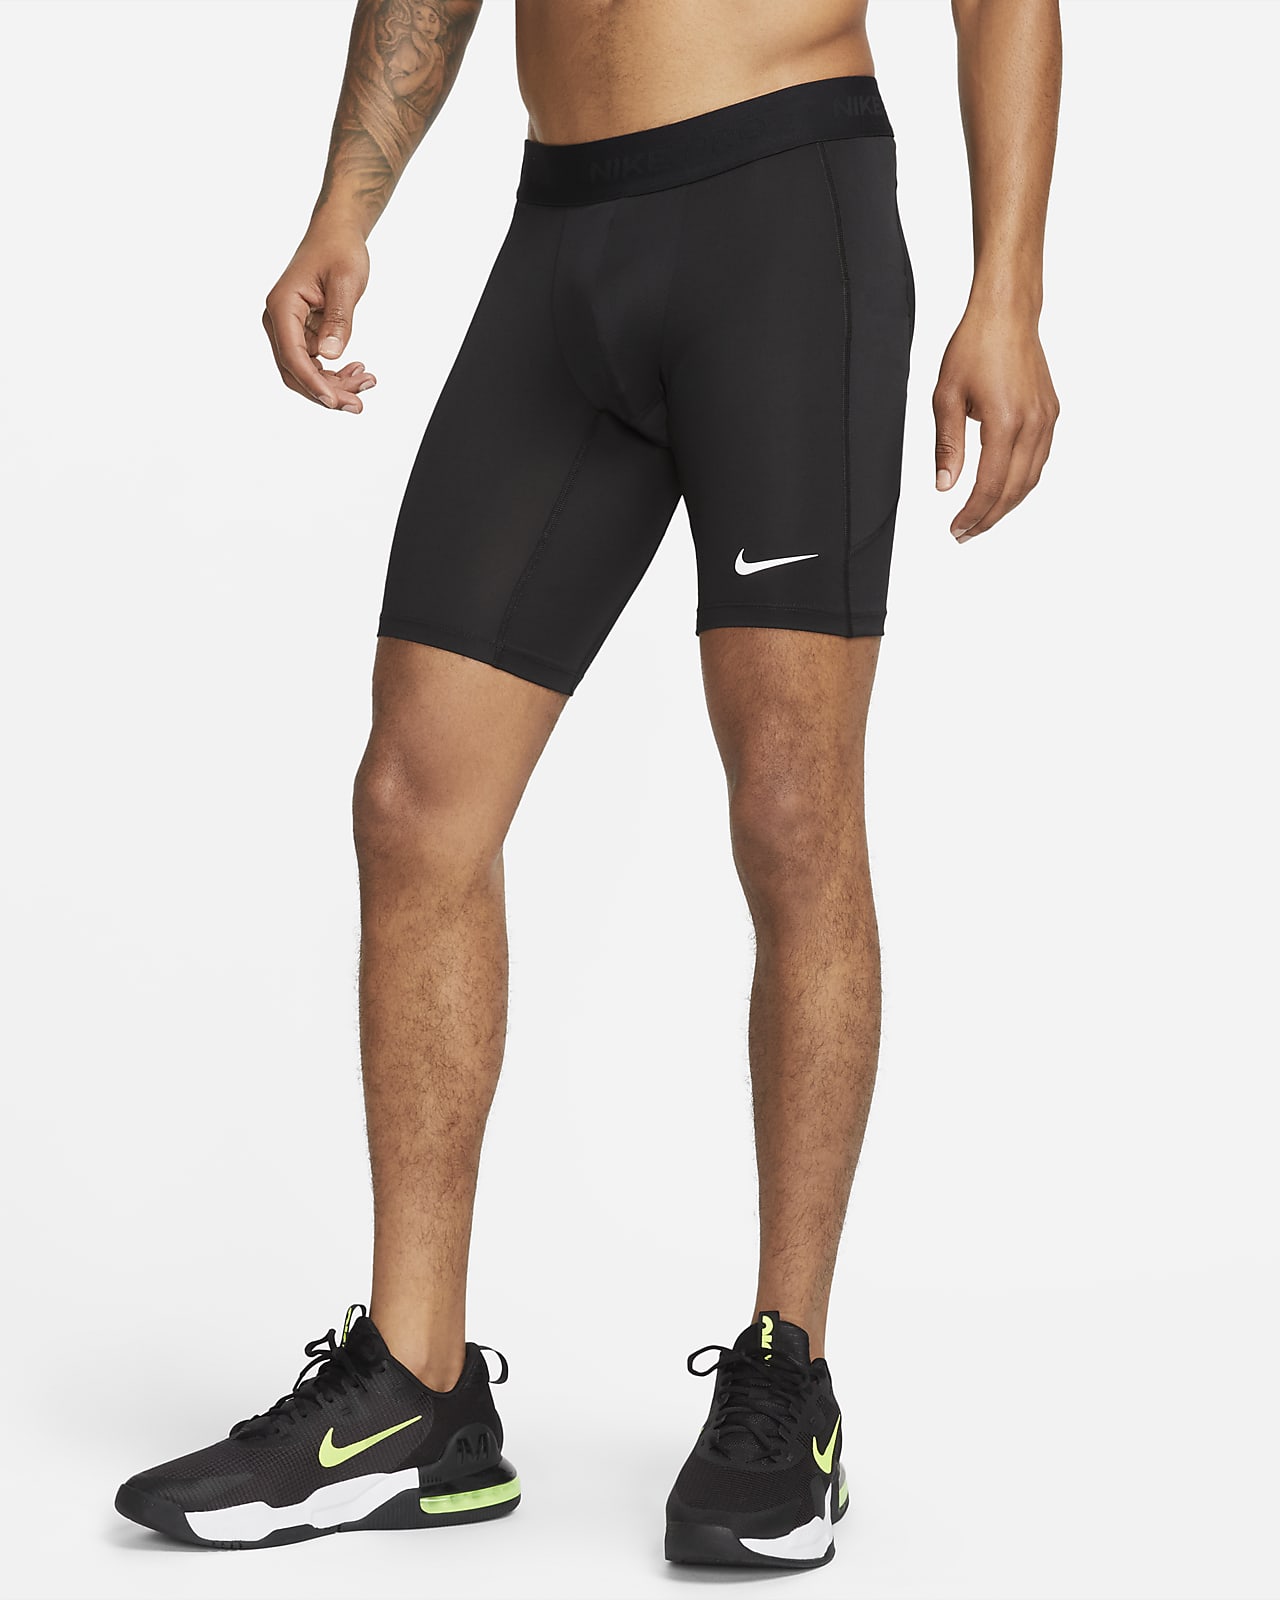 NIKE PRO NBA team issued hypercool compression shorts